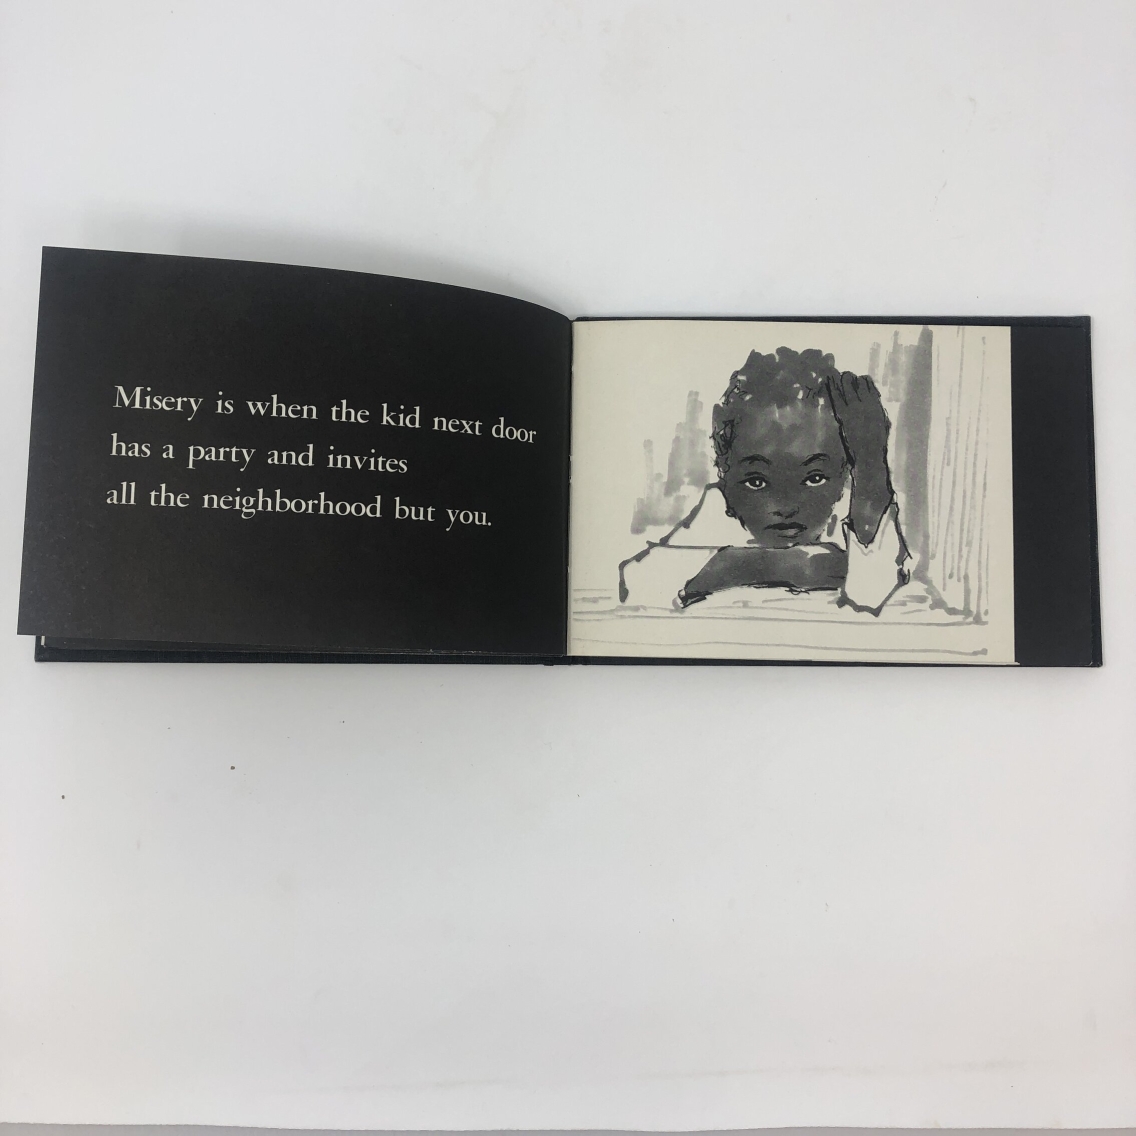 Photograph of a page in the children's book, Black Misery, by Langston Hughes and illustrated by Arouni. The text reads, "Misery is when the kid next door has a party and invites all the neighborhood but you." The accompanying illustration is of a Black child with their head in their hands, looking sadly up at the reader.